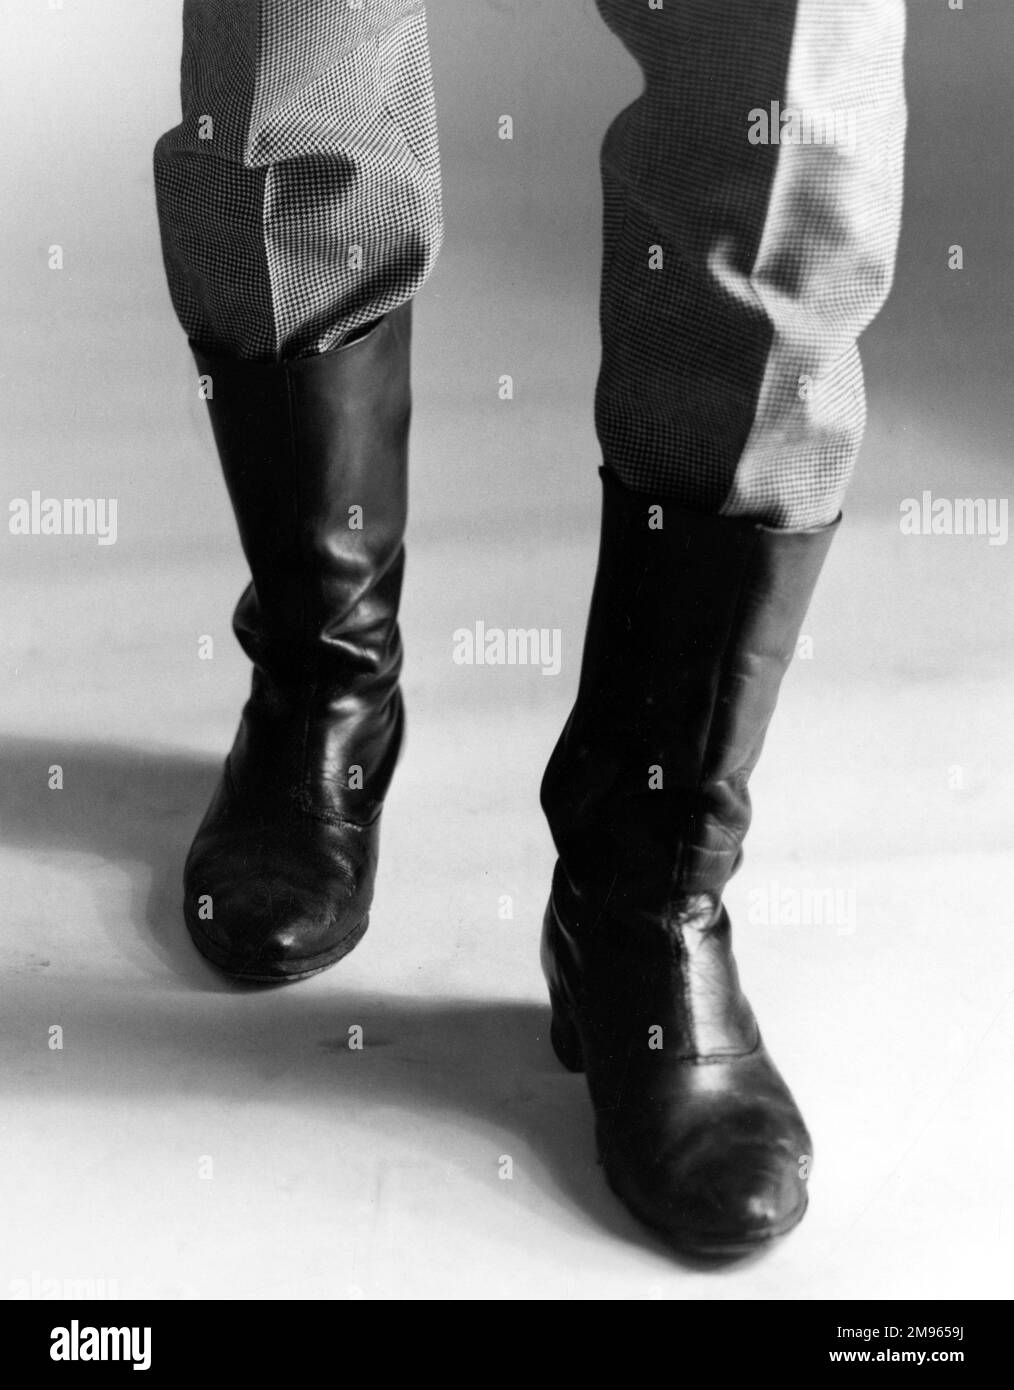 Boots for Black and White Stock Photos & Images - Alamy